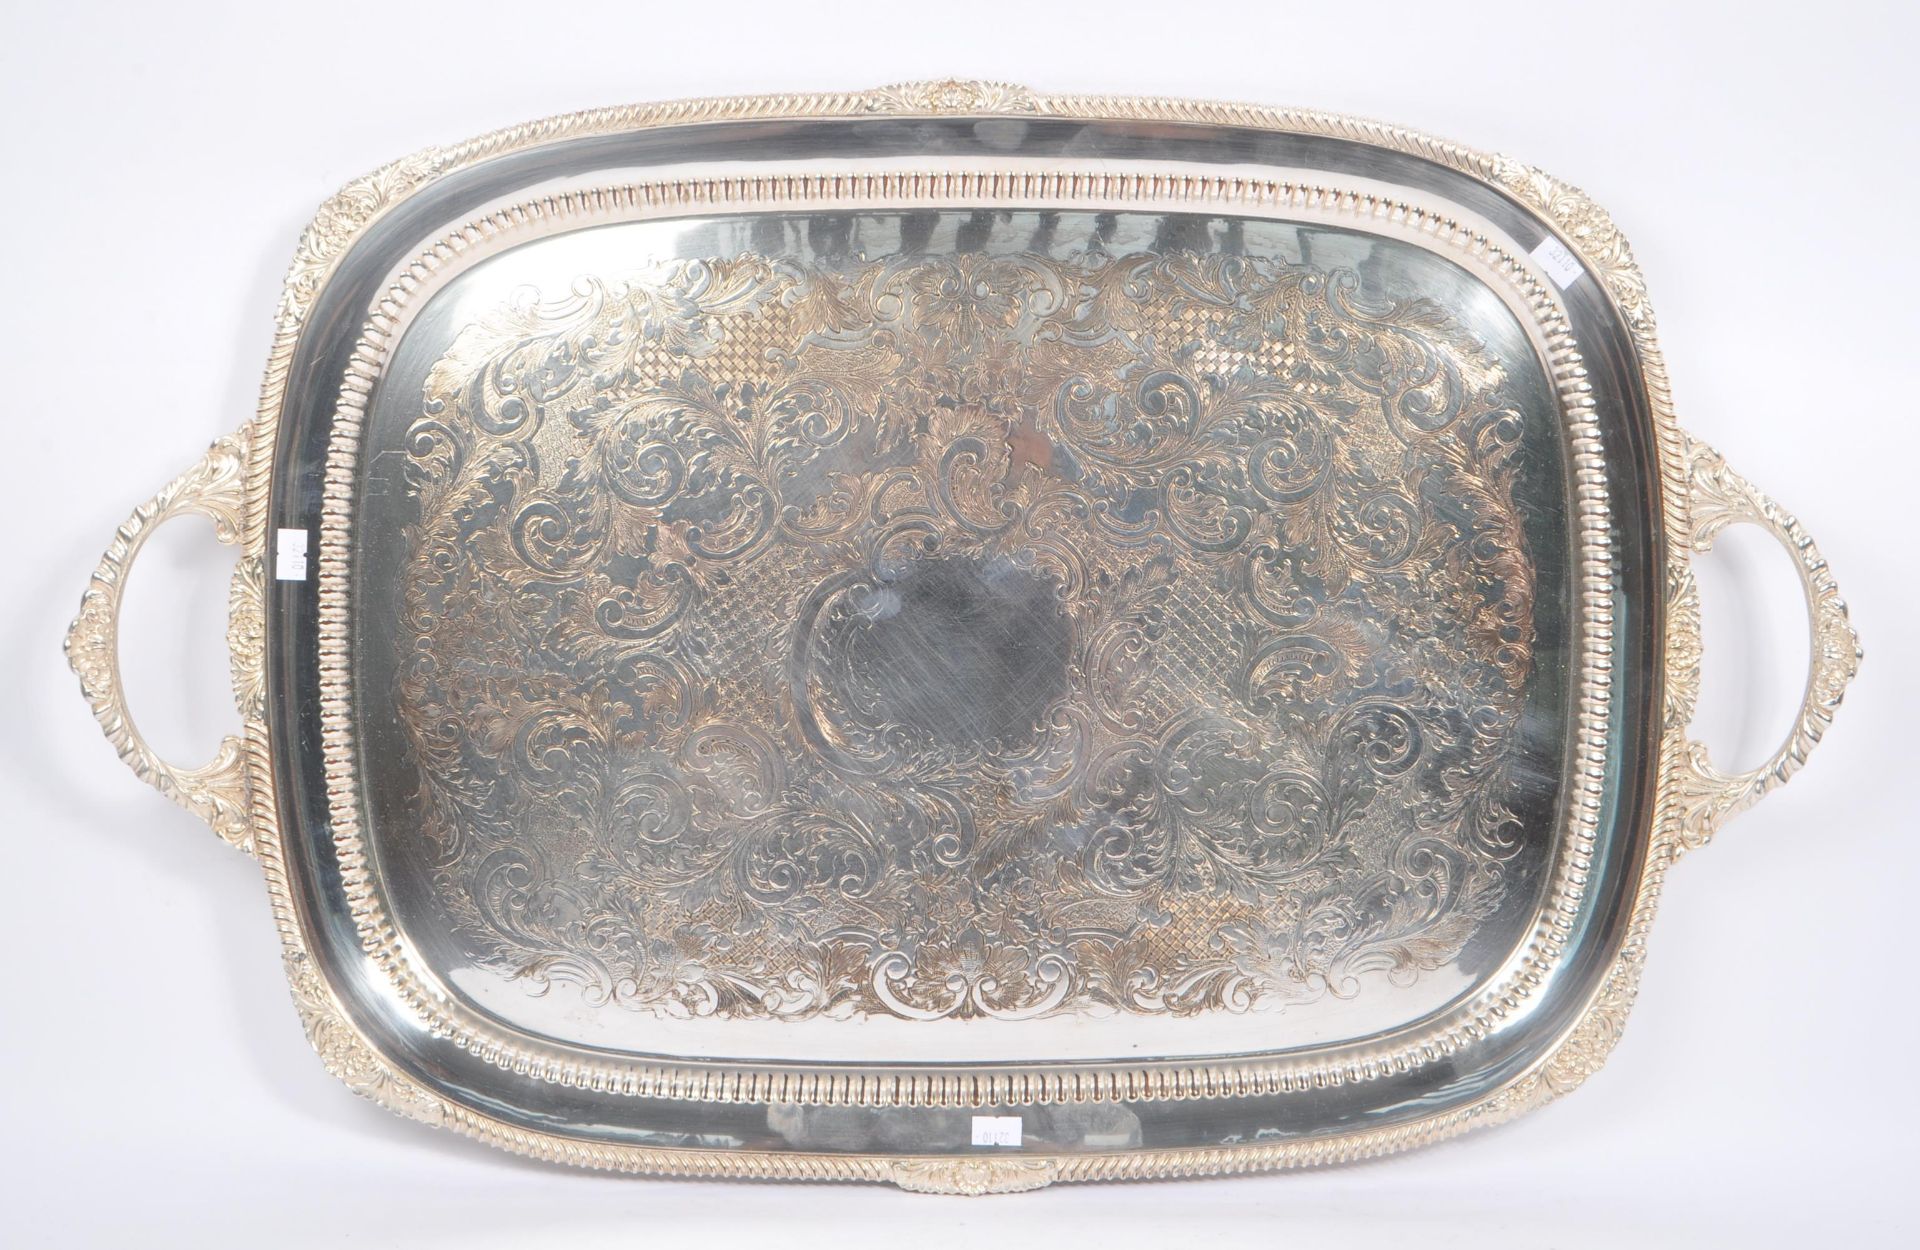 POSTON PRODUCTS LTD LONSDALE SILVER PLATE TRAY